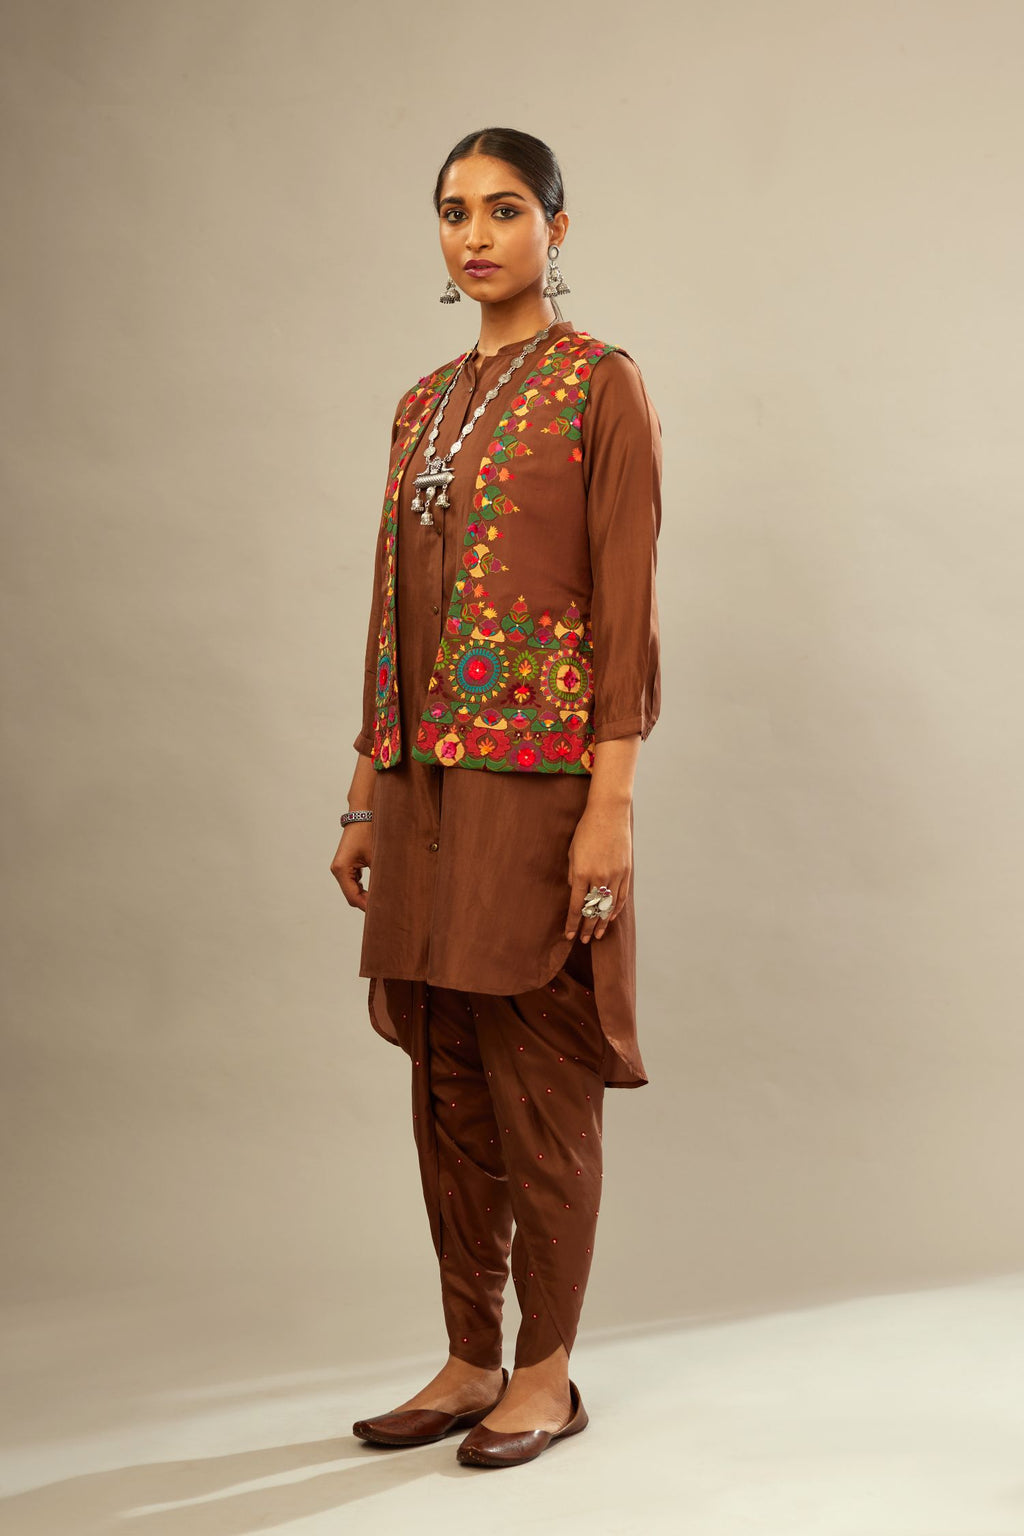 A four piece set in Brown silk comprising of a short kurta with front button placket, worn with a short waistcoat jacket.